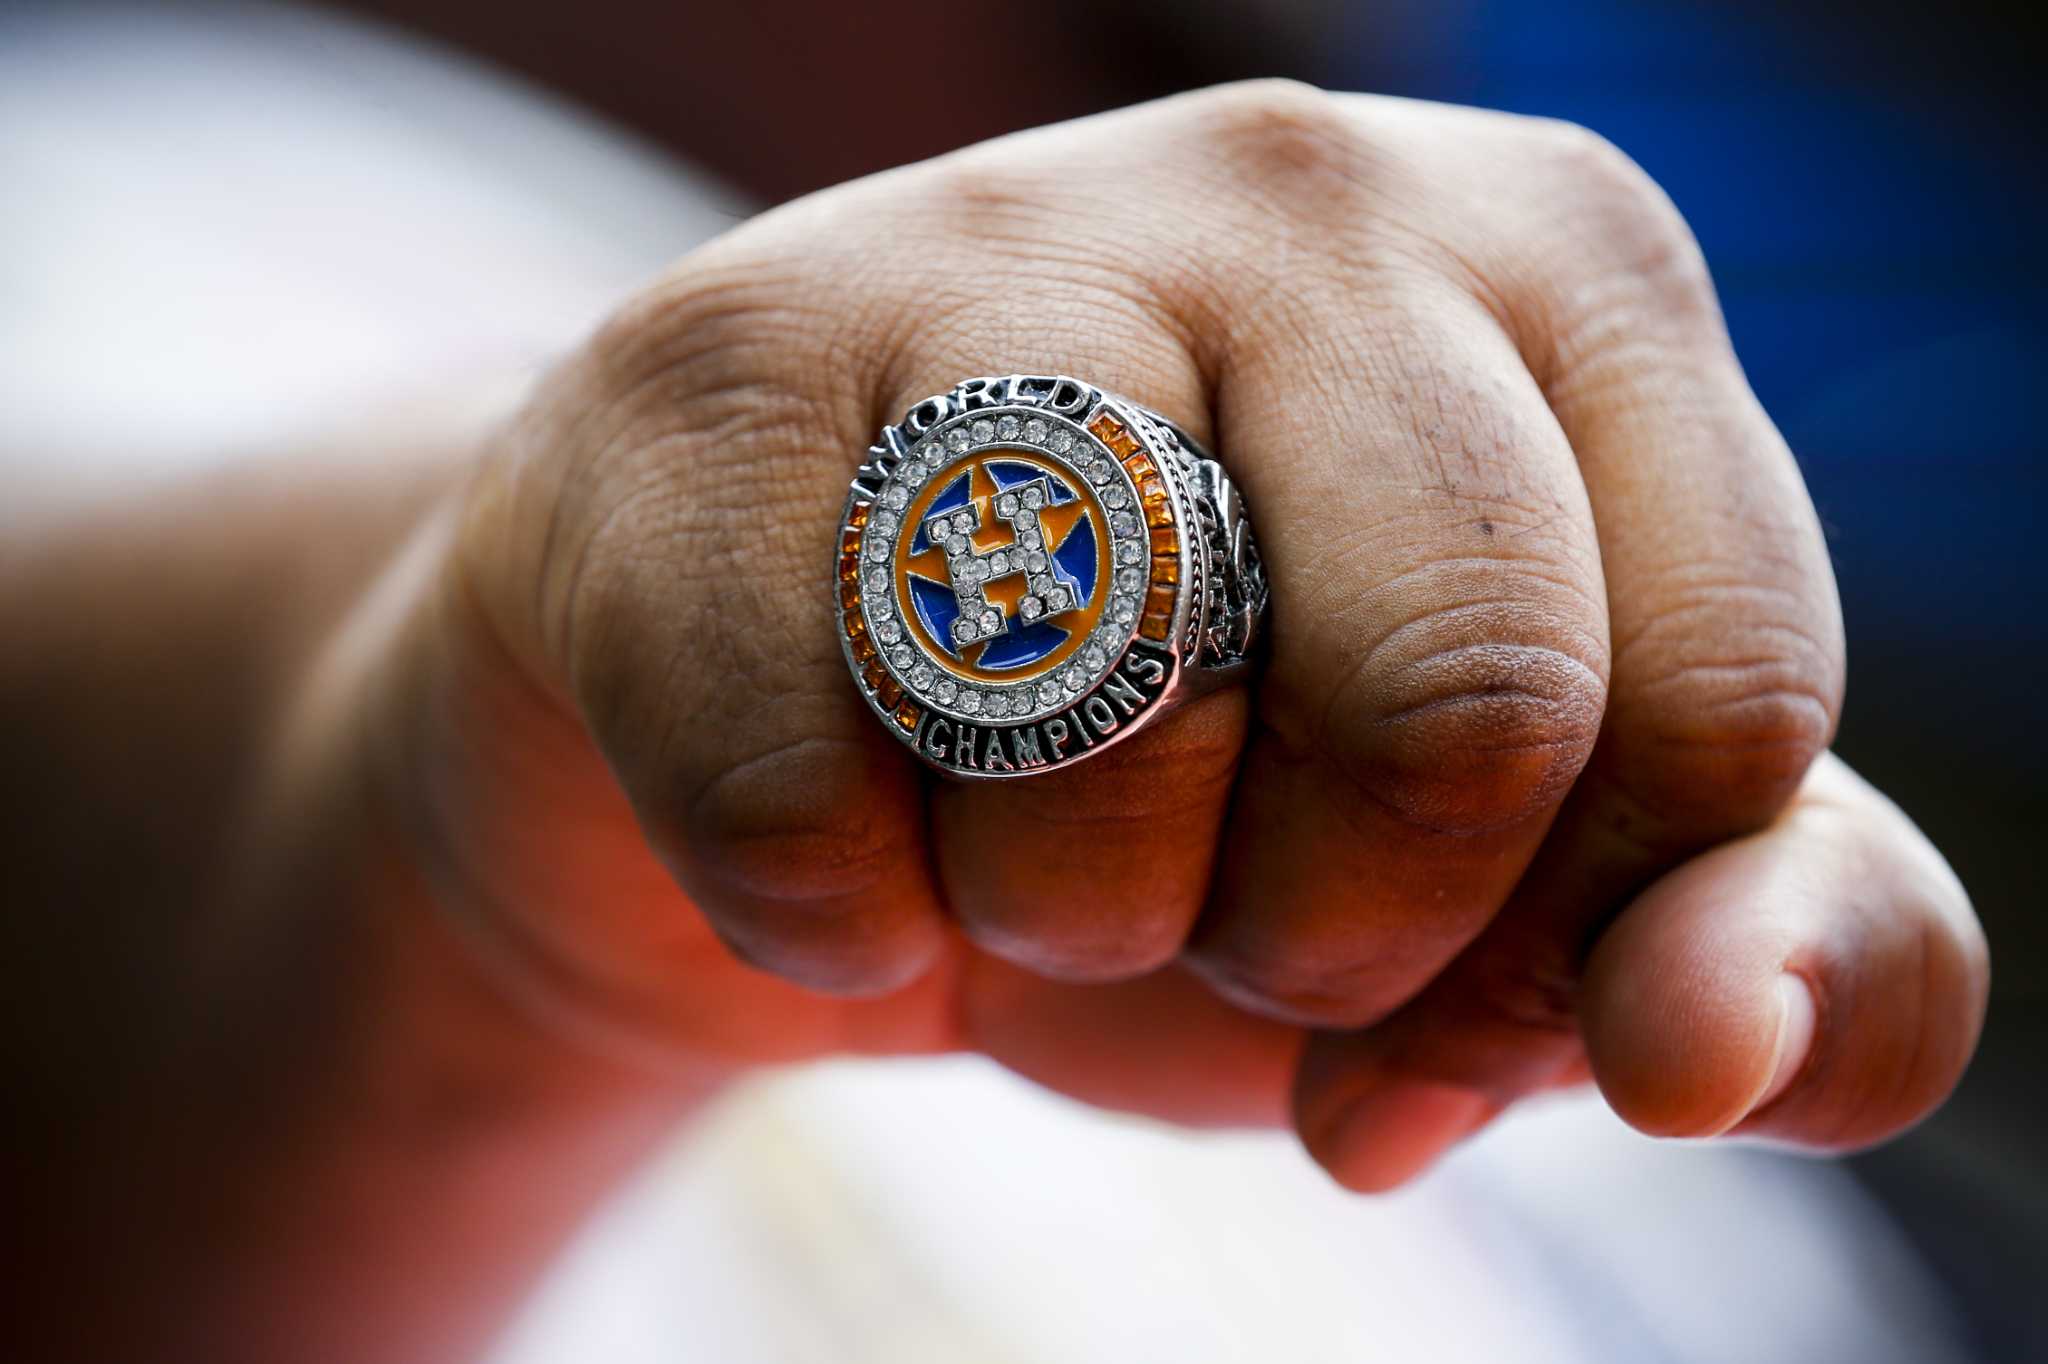 Too Big for King Kong, Astros' World Series Ring Replicas Are a Sight –  Beeghly & Co.